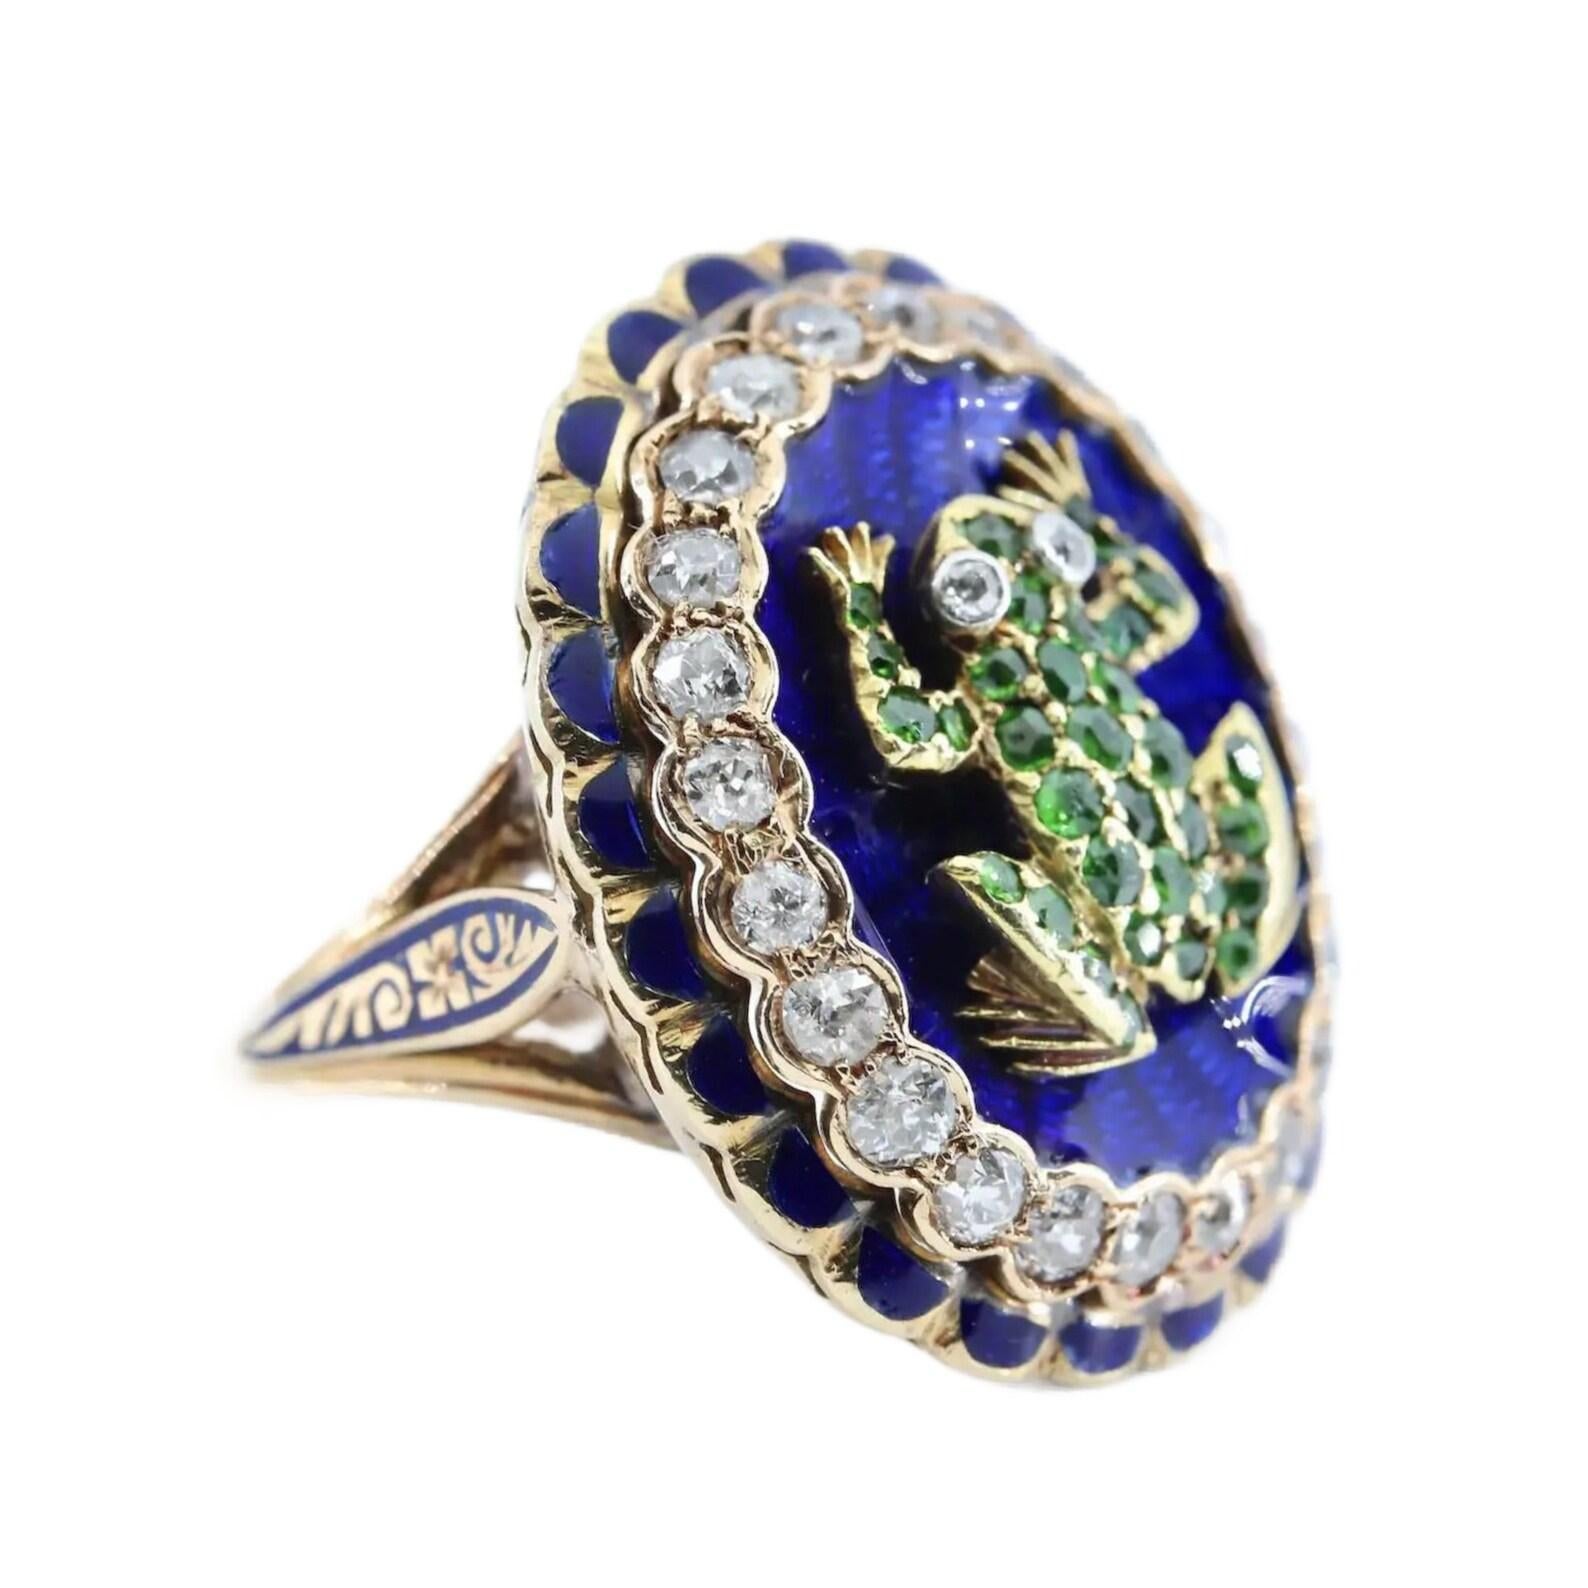 A victorian period ring centered by demantoid garnet set frog atop a bed of rich blue enamel.

The frog adorned with 33 old mine cut demantoid garnets; and a pair of old mine cut diamond eyes set in bezels of platinum.

Surrounded by rich blue